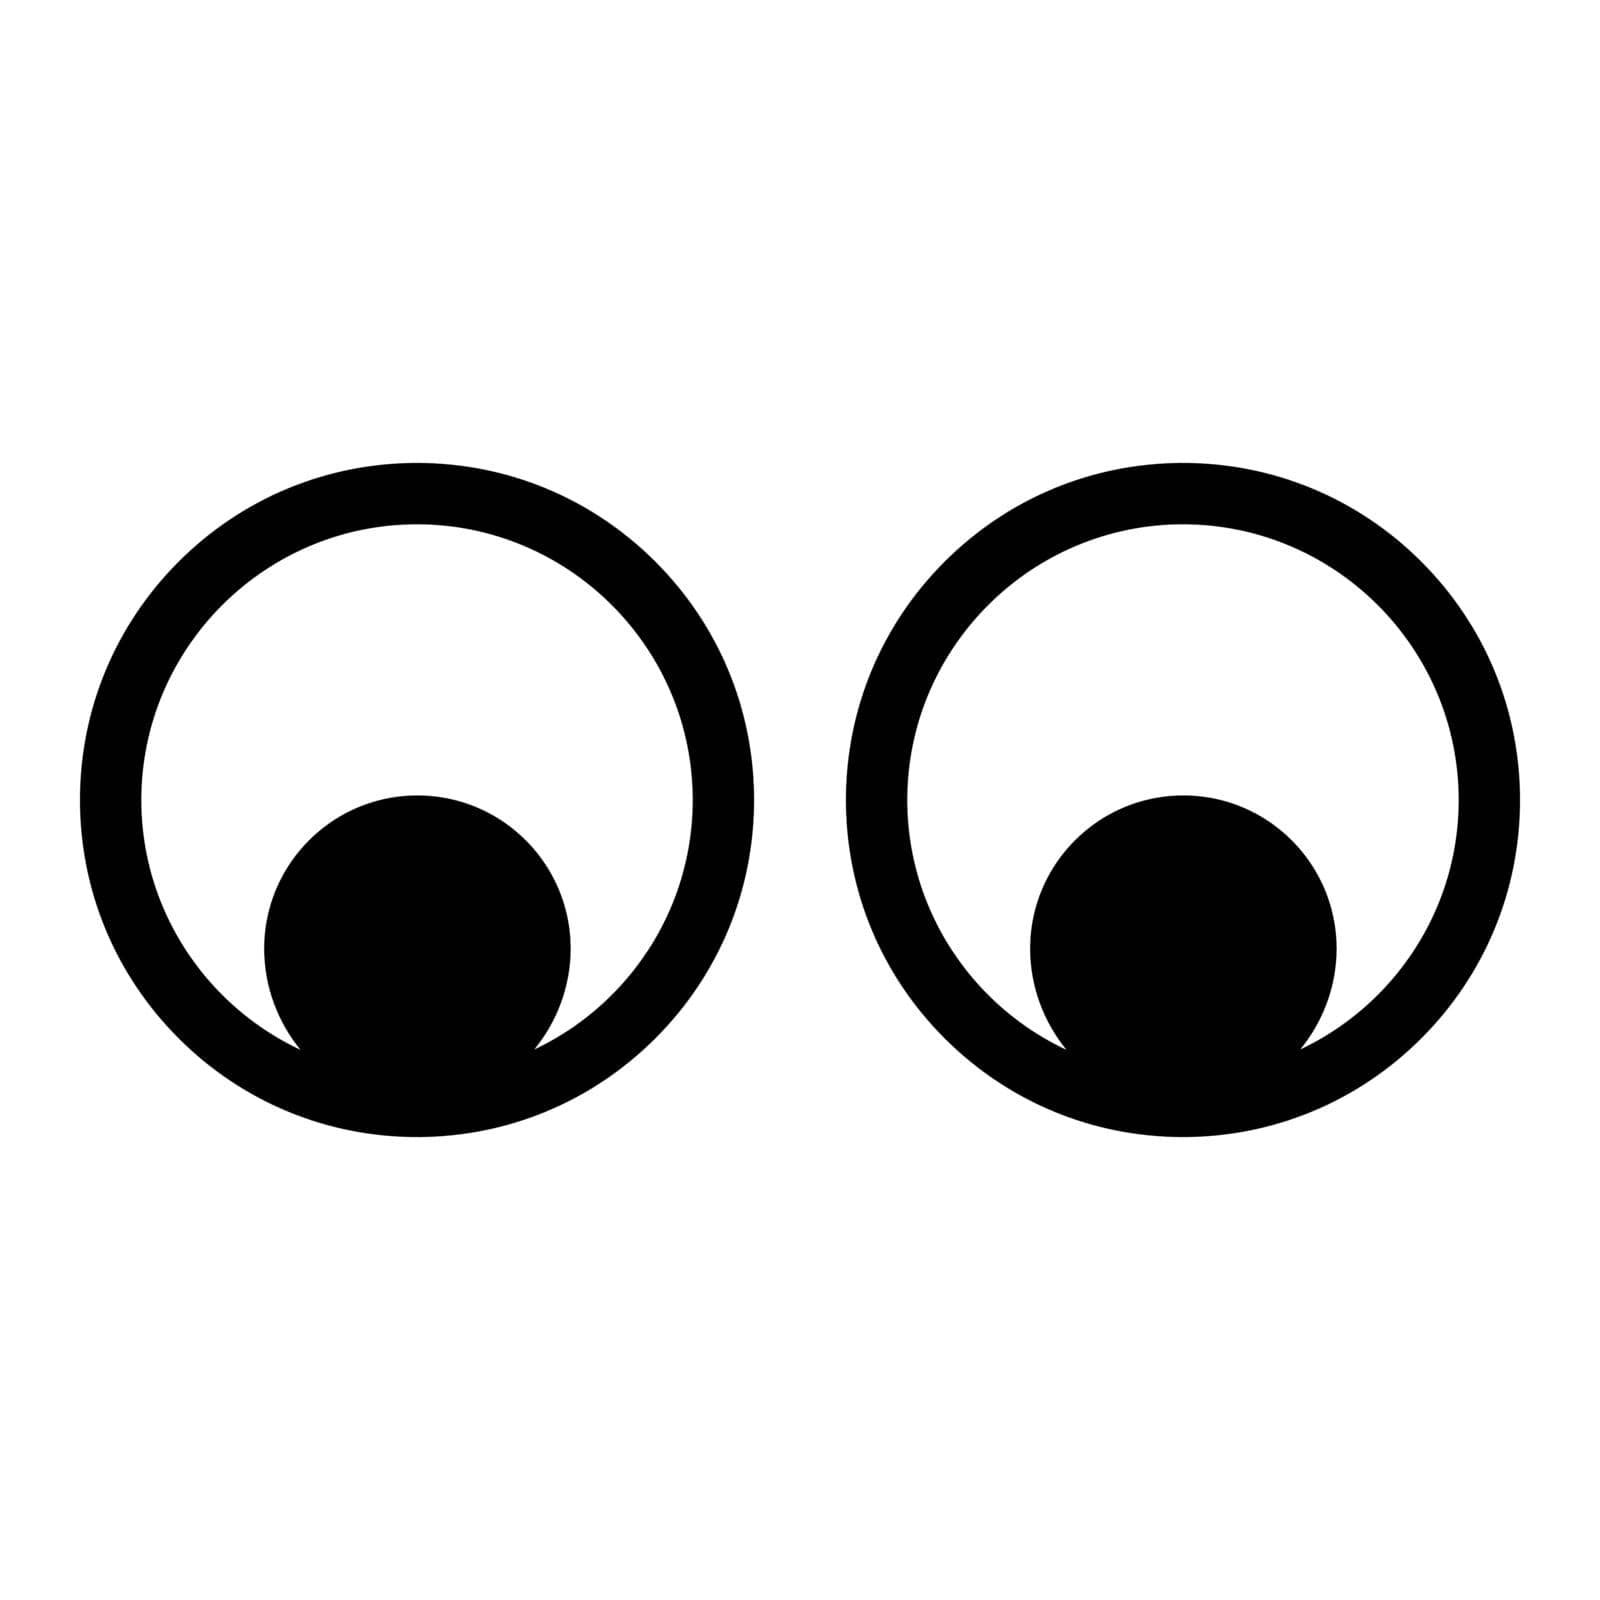 Eyes Look concept Two pairs eye View icon black color vector illustration flat style image by serhii435